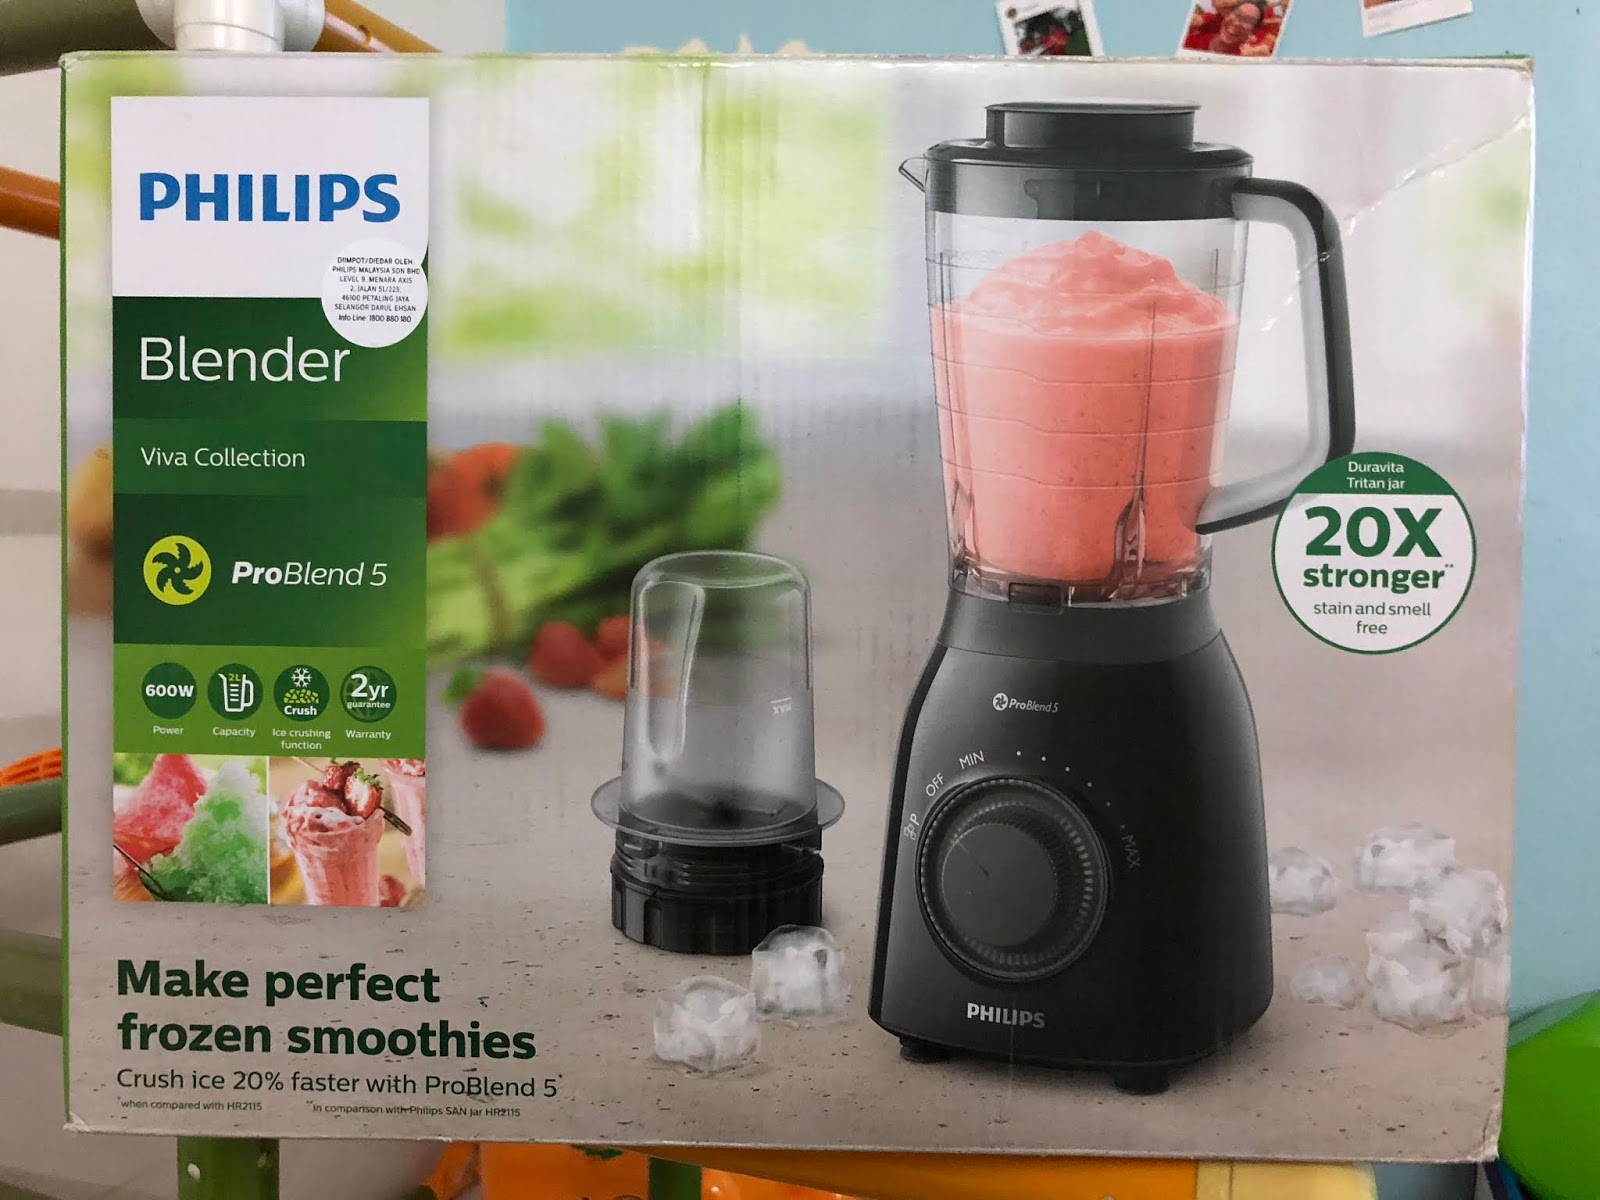 My Children Blending Adventure With Philips Collection Blender! - Mouse Mommy